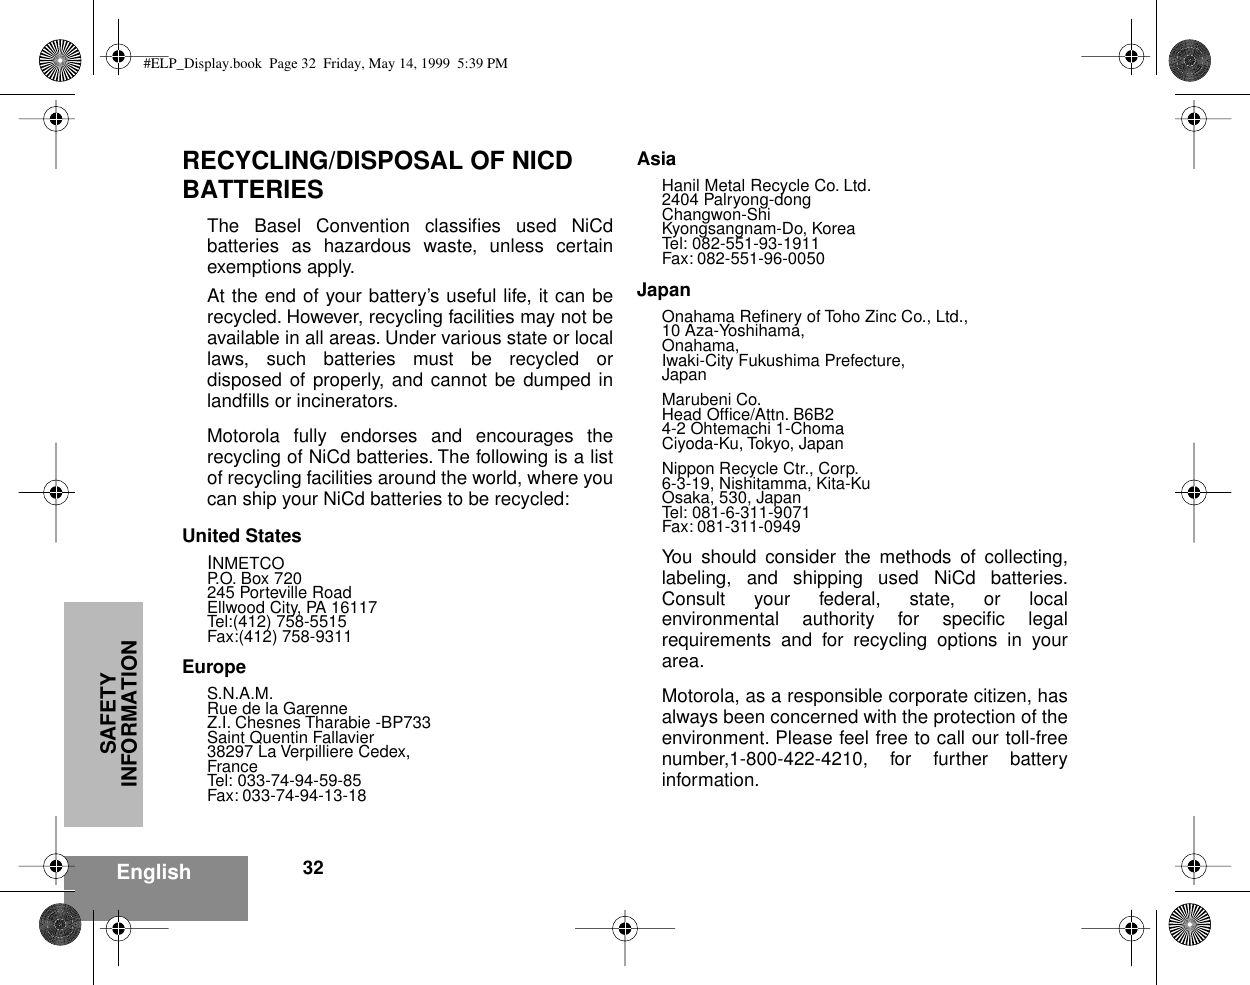 SAFETY INFORMATION32EnglishRECYCLING/DISPOSAL OF NICD BATTERIESThe Basel Convention classiﬁes used NiCdbatteries as hazardous waste, unless certainexemptions apply.At the end of your battery’s useful life, it can berecycled. However, recycling facilities may not beavailable in all areas. Under various state or locallaws, such batteries must be recycled ordisposed of properly, and cannot be dumped inlandﬁlls or incinerators.Motorola fully endorses and encourages therecycling of NiCd batteries. The following is a listof recycling facilities around the world, where youcan ship your NiCd batteries to be recycled:United StatesINMETCOP.O. Box 720245 Porteville RoadEllwood City, PA 16117Tel:(412) 758-5515Fax:(412) 758-9311EuropeS.N.A.M.Rue de la GarenneZ.I. Chesnes Tharabie -BP733Saint Quentin Fallavier38297 La Verpilliere Cedex,FranceTel: 033-74-94-59-85Fax: 033-74-94-13-18AsiaHanil Metal Recycle Co. Ltd.2404 Palryong-dongChangwon-ShiKyongsangnam-Do, KoreaTel: 082-551-93-1911Fax: 082-551-96-0050JapanOnahama Reﬁnery of Toho Zinc Co., Ltd.,10 Aza-Yoshihama,Onahama,Iwaki-City Fukushima Prefecture,JapanMarubeni Co.Head Ofﬁce/Attn. B6B24-2 Ohtemachi 1-ChomaCiyoda-Ku, Tokyo, JapanNippon Recycle Ctr., Corp.6-3-19, Nishitamma, Kita-KuOsaka, 530, JapanTel: 081-6-311-9071Fax: 081-311-0949You should consider the methods of collecting,labeling, and shipping used NiCd batteries.Consult your federal, state, or localenvironmental authority for speciﬁc legalrequirements and for recycling options in yourarea.Motorola, as a responsible corporate citizen, hasalways been concerned with the protection of theenvironment. Please feel free to call our toll-freenumber,1-800-422-4210, for further batteryinformation.#ELP_Display.book  Page 32  Friday, May 14, 1999  5:39 PM